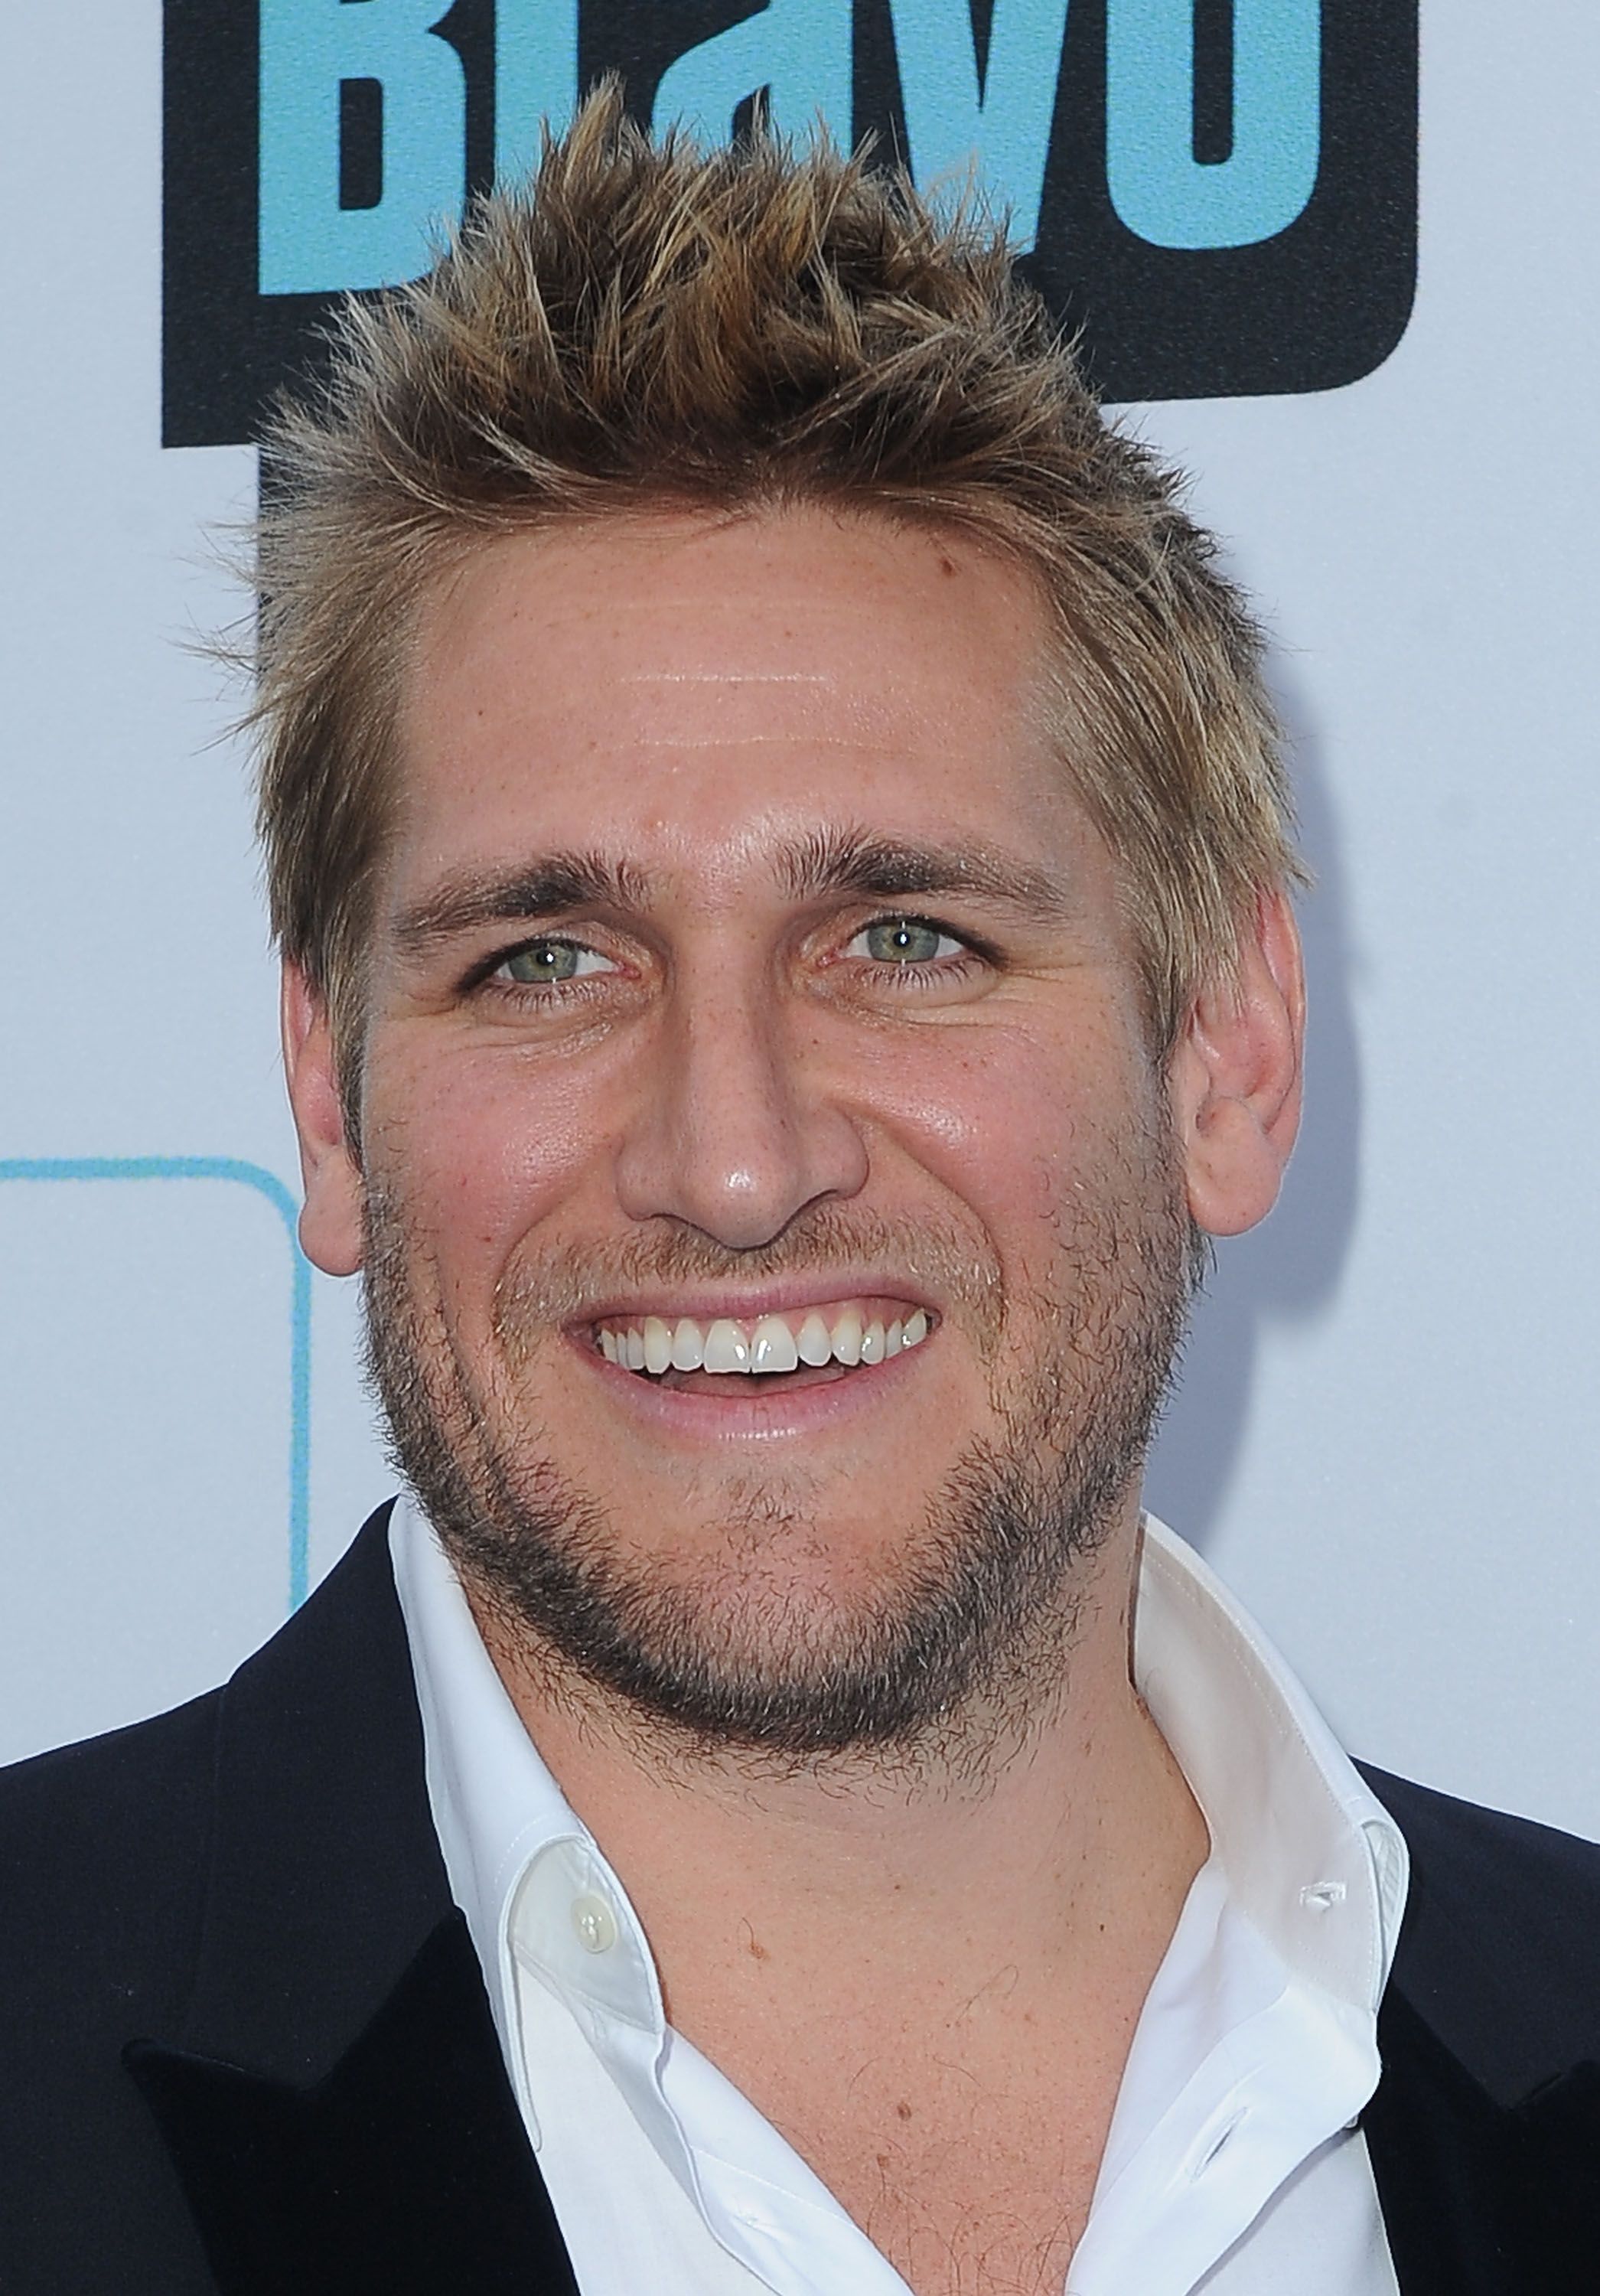 CURTIS STONE MARRIED AGAIN IN MAJORCA!